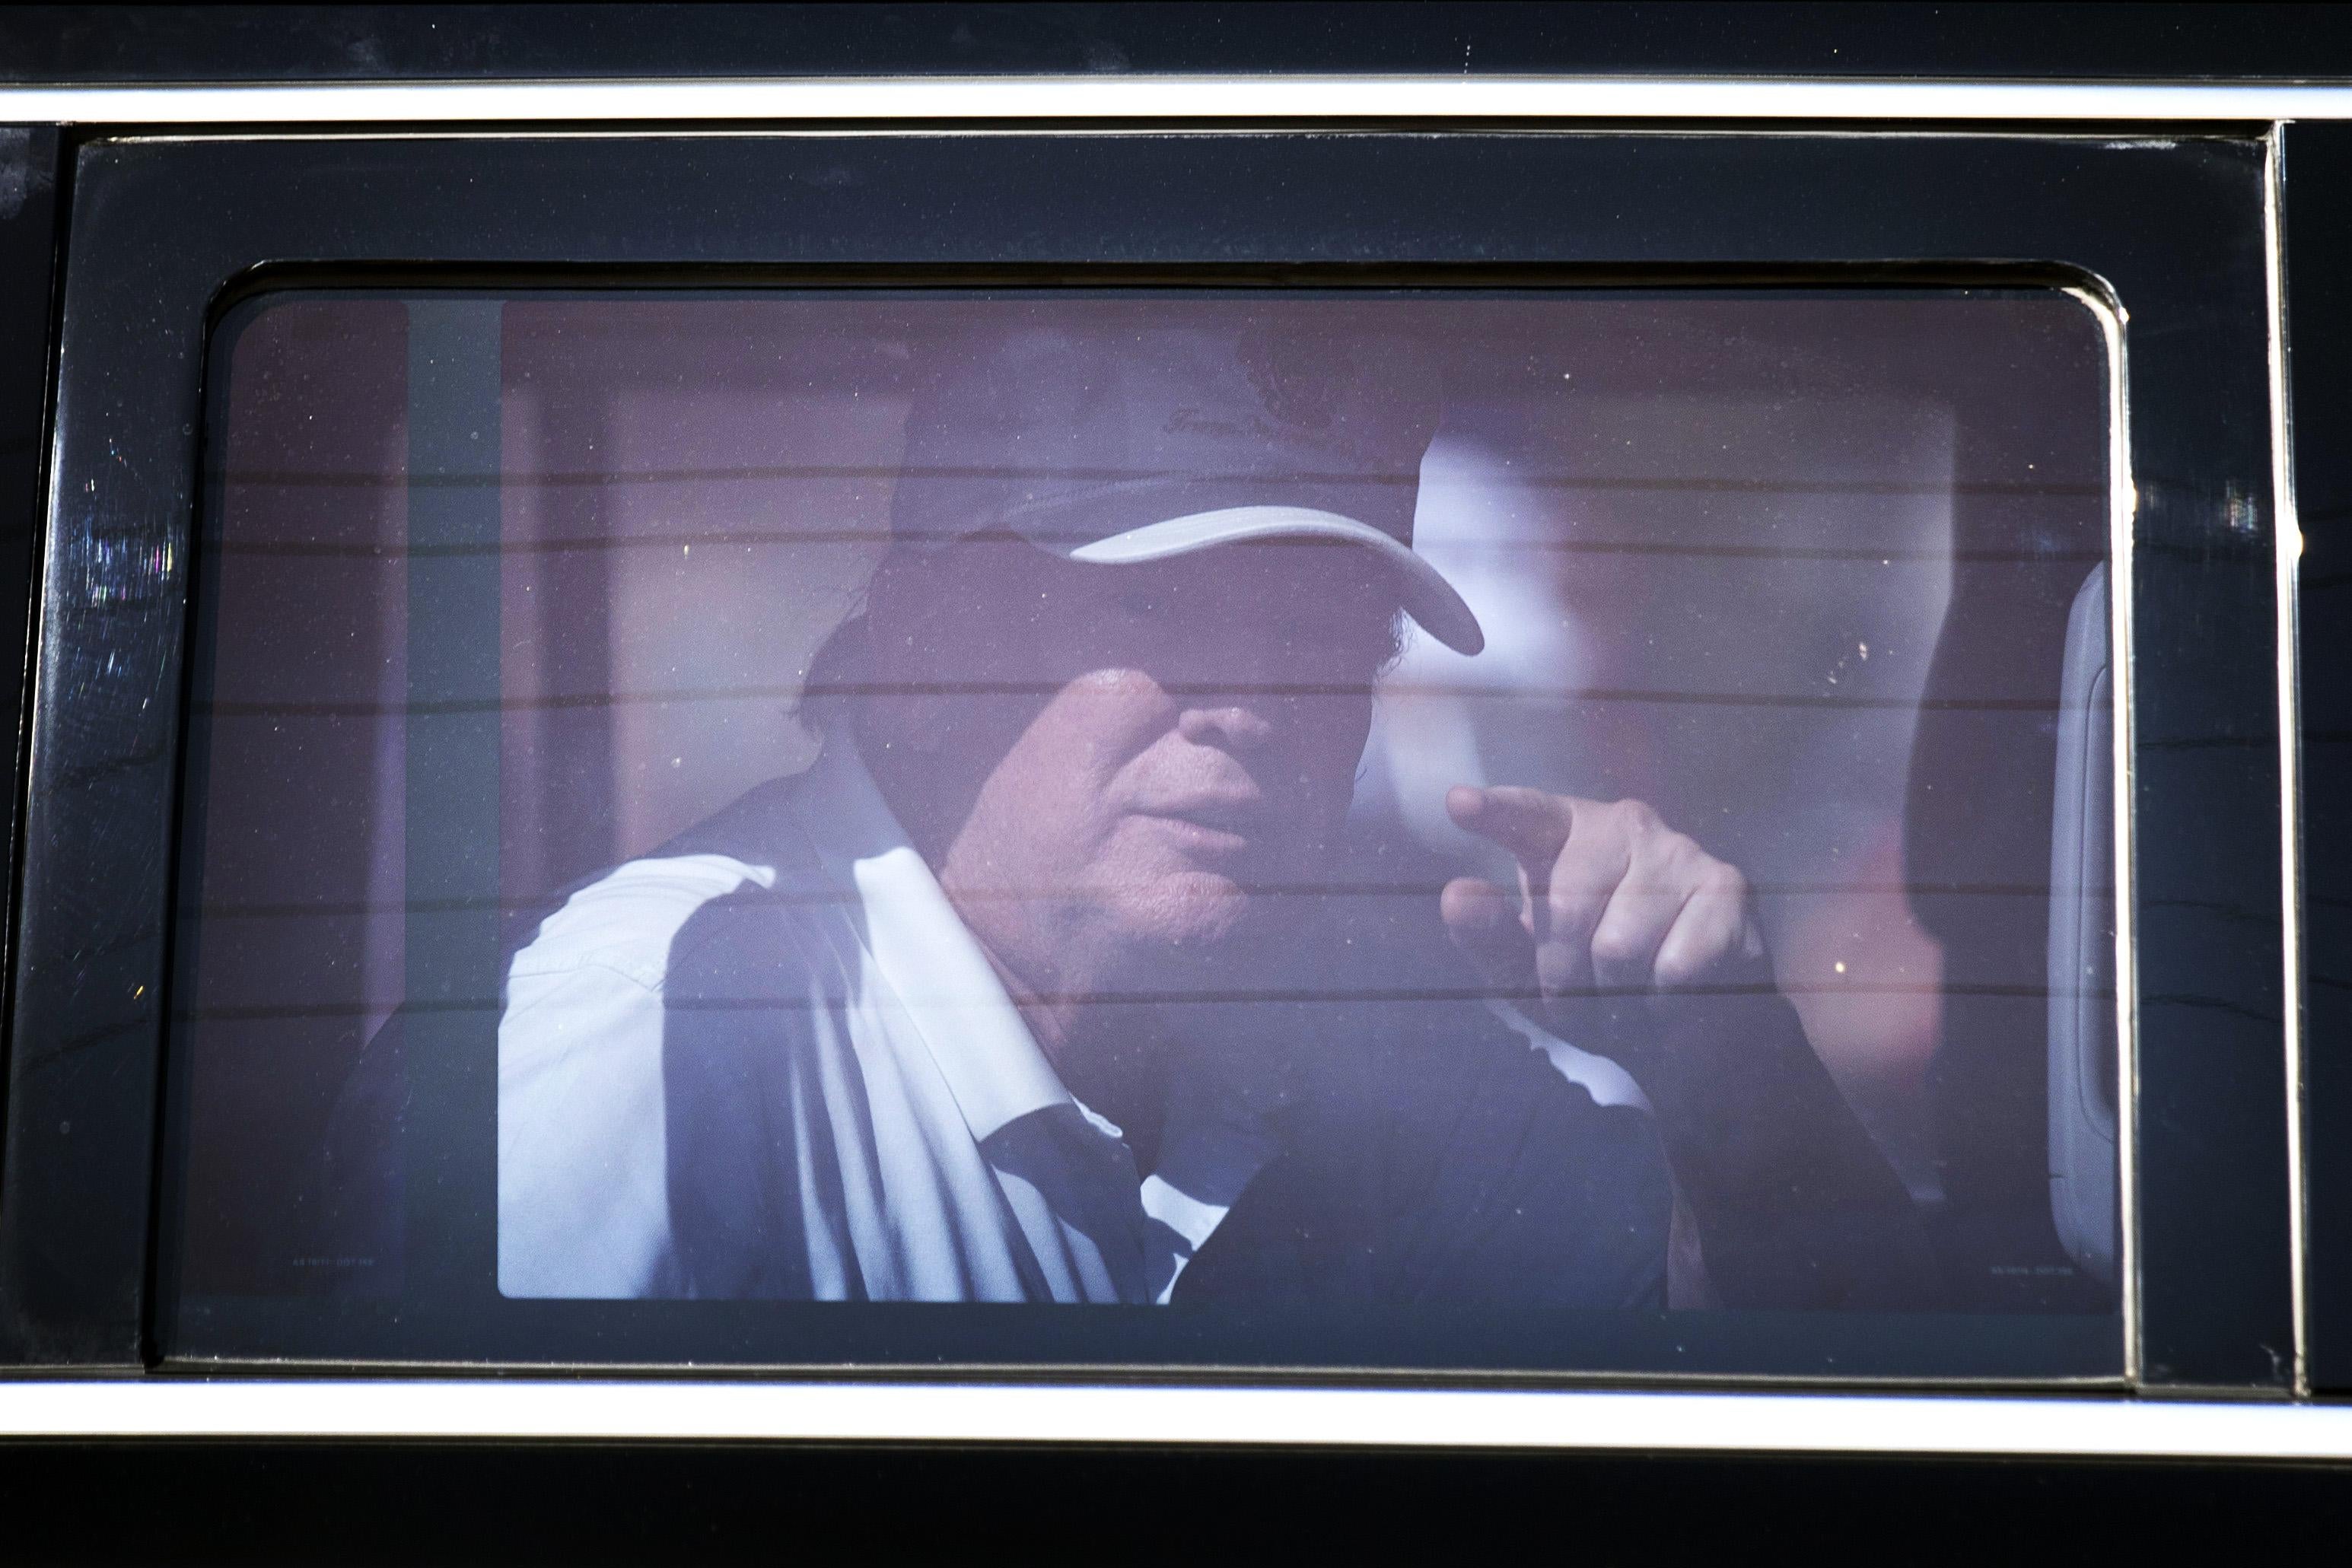 Trump, wearing a white hat, points from inside a limo.